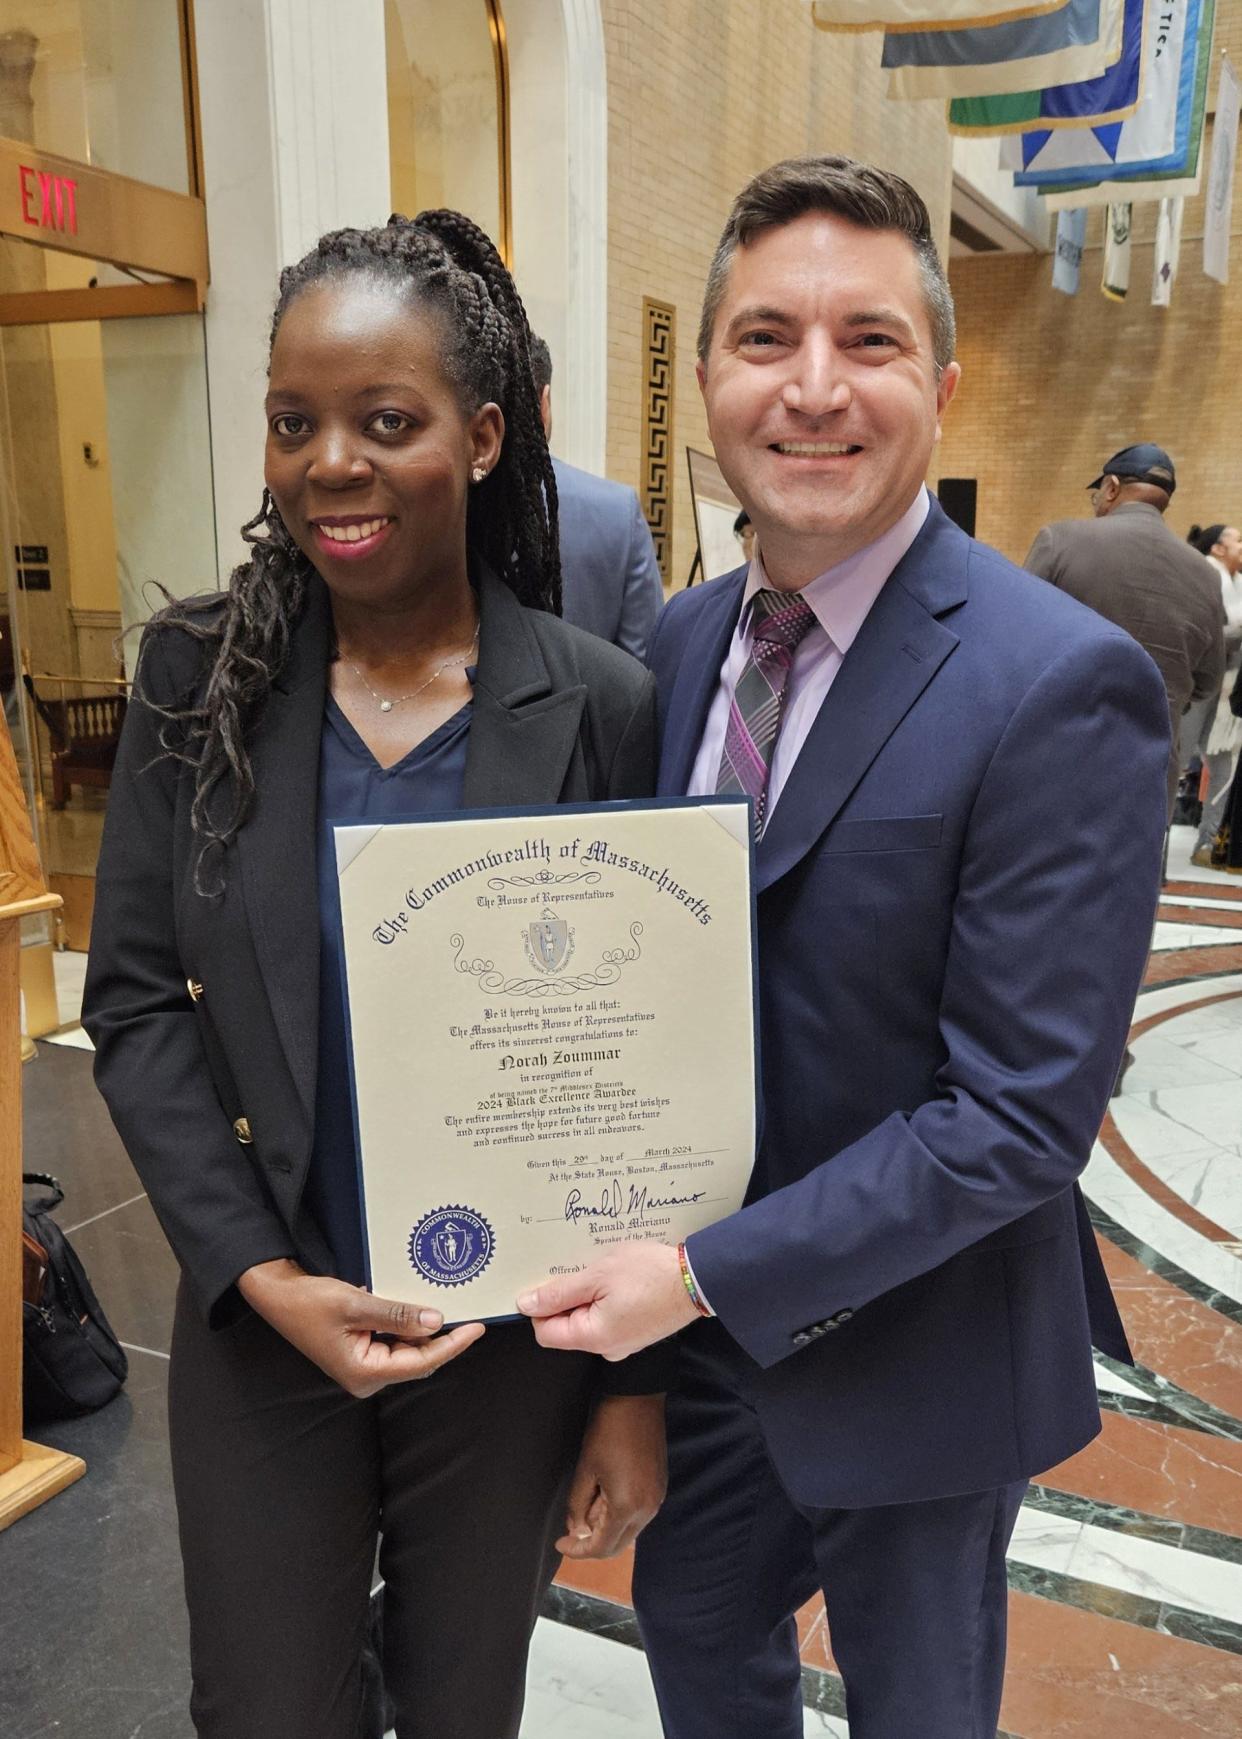 State Rep. Jack Patrick Lewis, D-Framingham, right, nominated Norah Zoummar for a Black Excellence Award for her work to support women and children in Uganda. The award is sponsored by the Massachusetts Black and Latino Legislative Caucus.